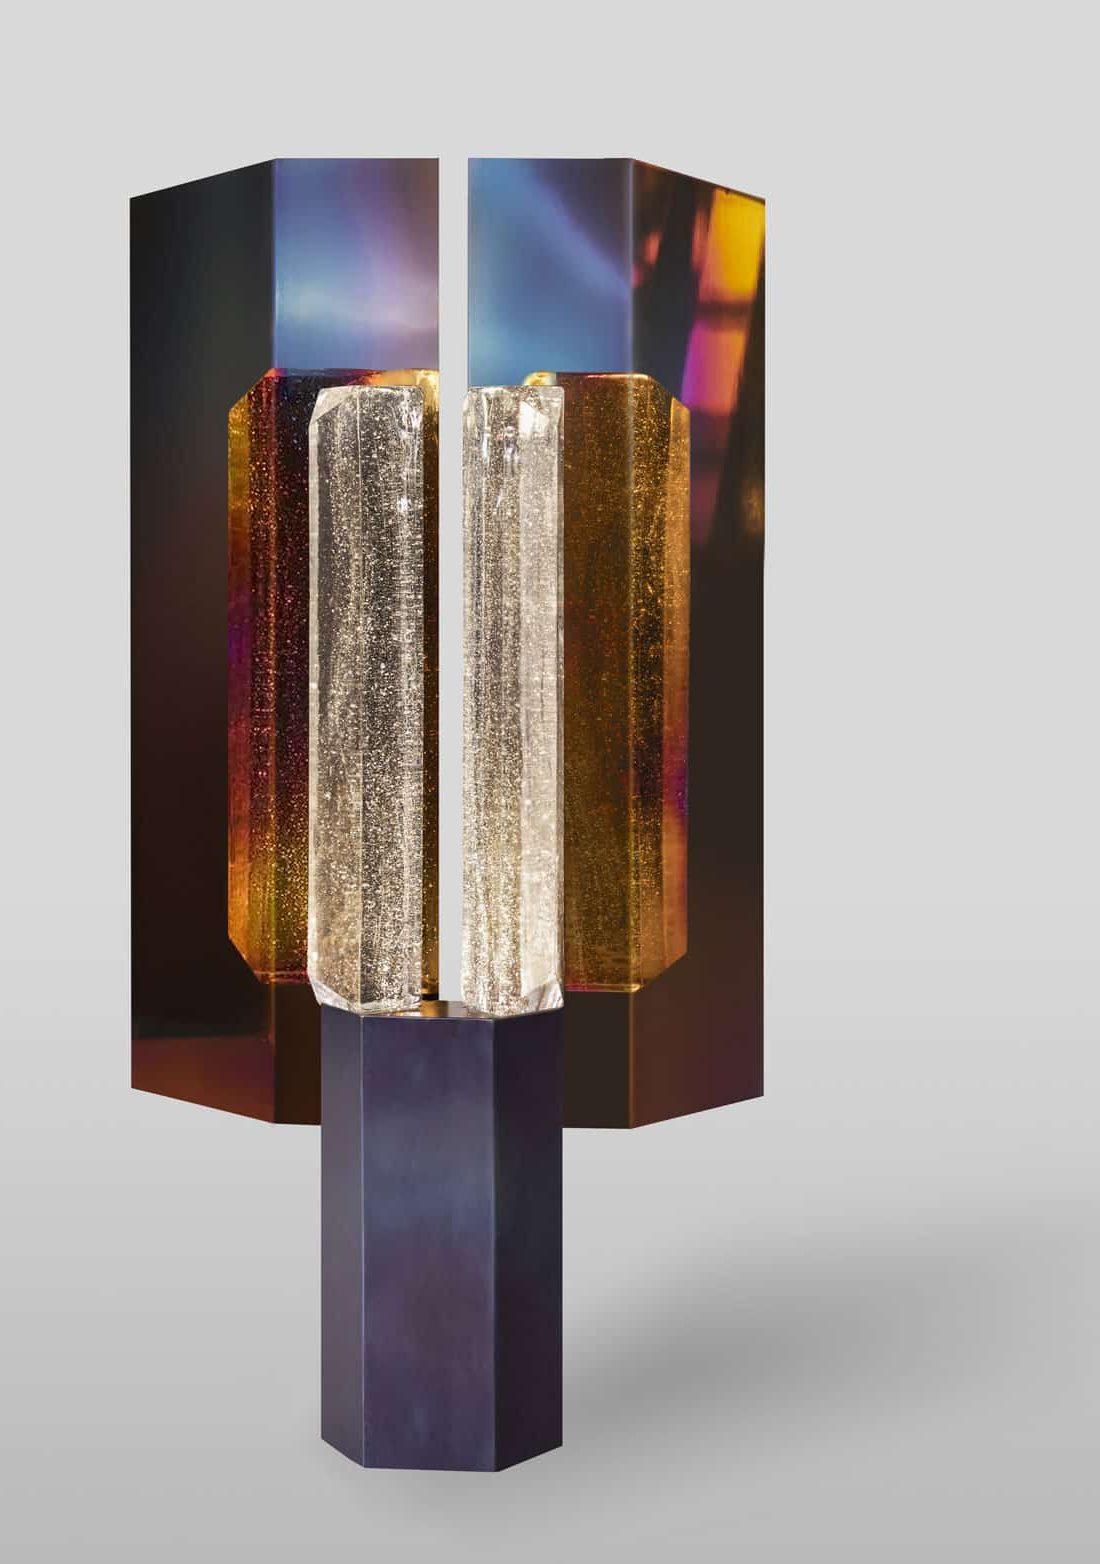 Rigel Grande Table Lamp by SB26
Limited Edition
Dimensions: L 42 x W 12 x H 85 cm
Materials: Steel, Glass. 

The Grande Rigel, in the limited edition, is an enlarged version of the Rigel lamp. Still a table lamp, it commands a significant scenic